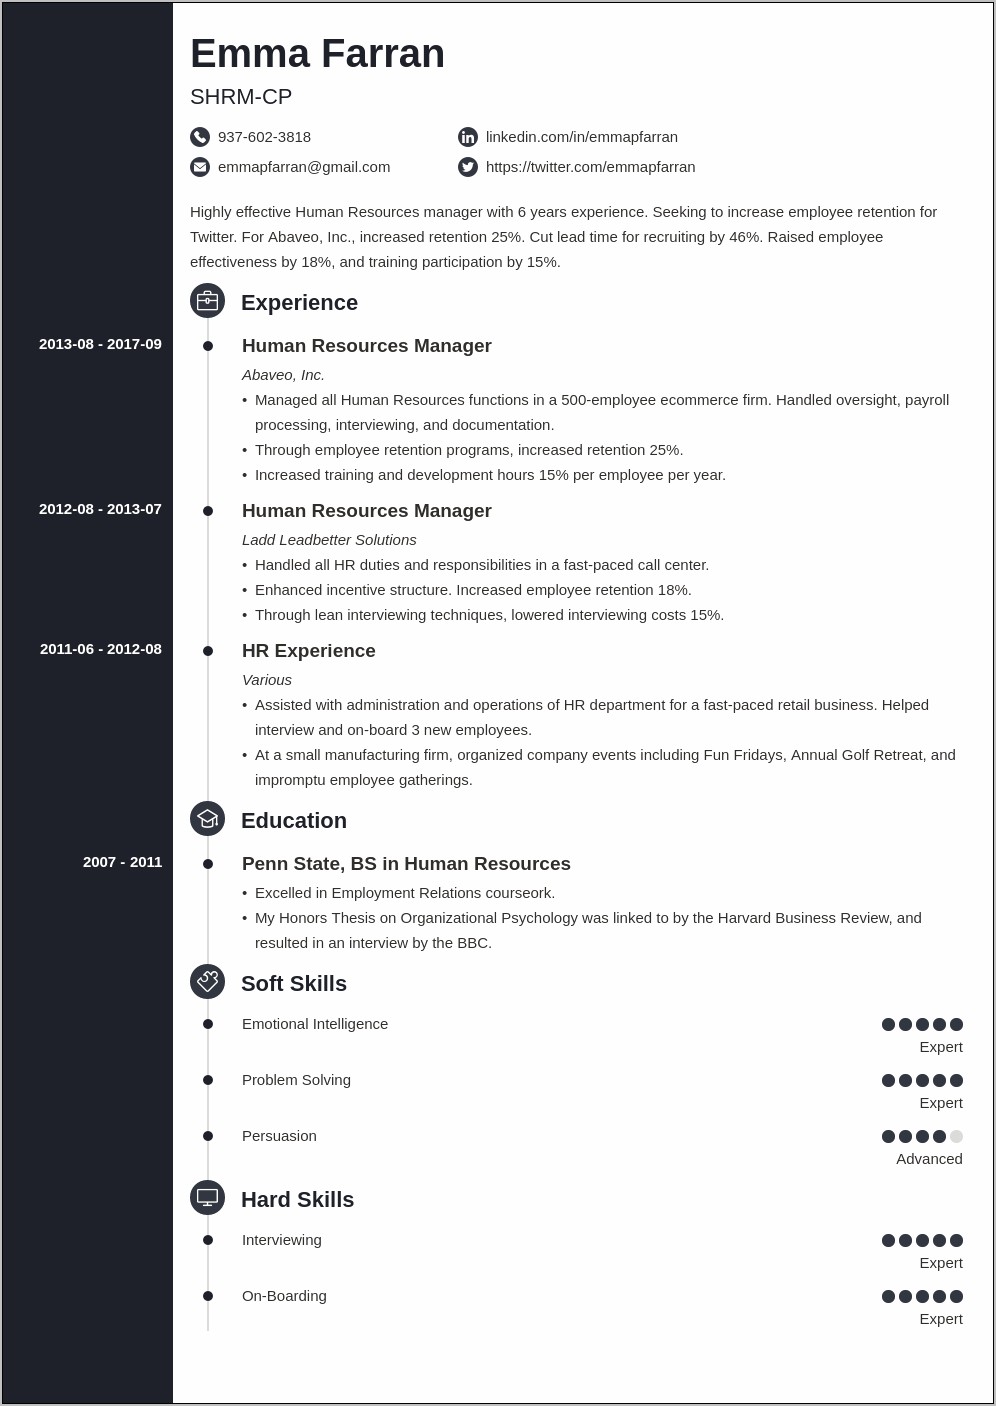 Hr Resume Format For 4 Years Experience